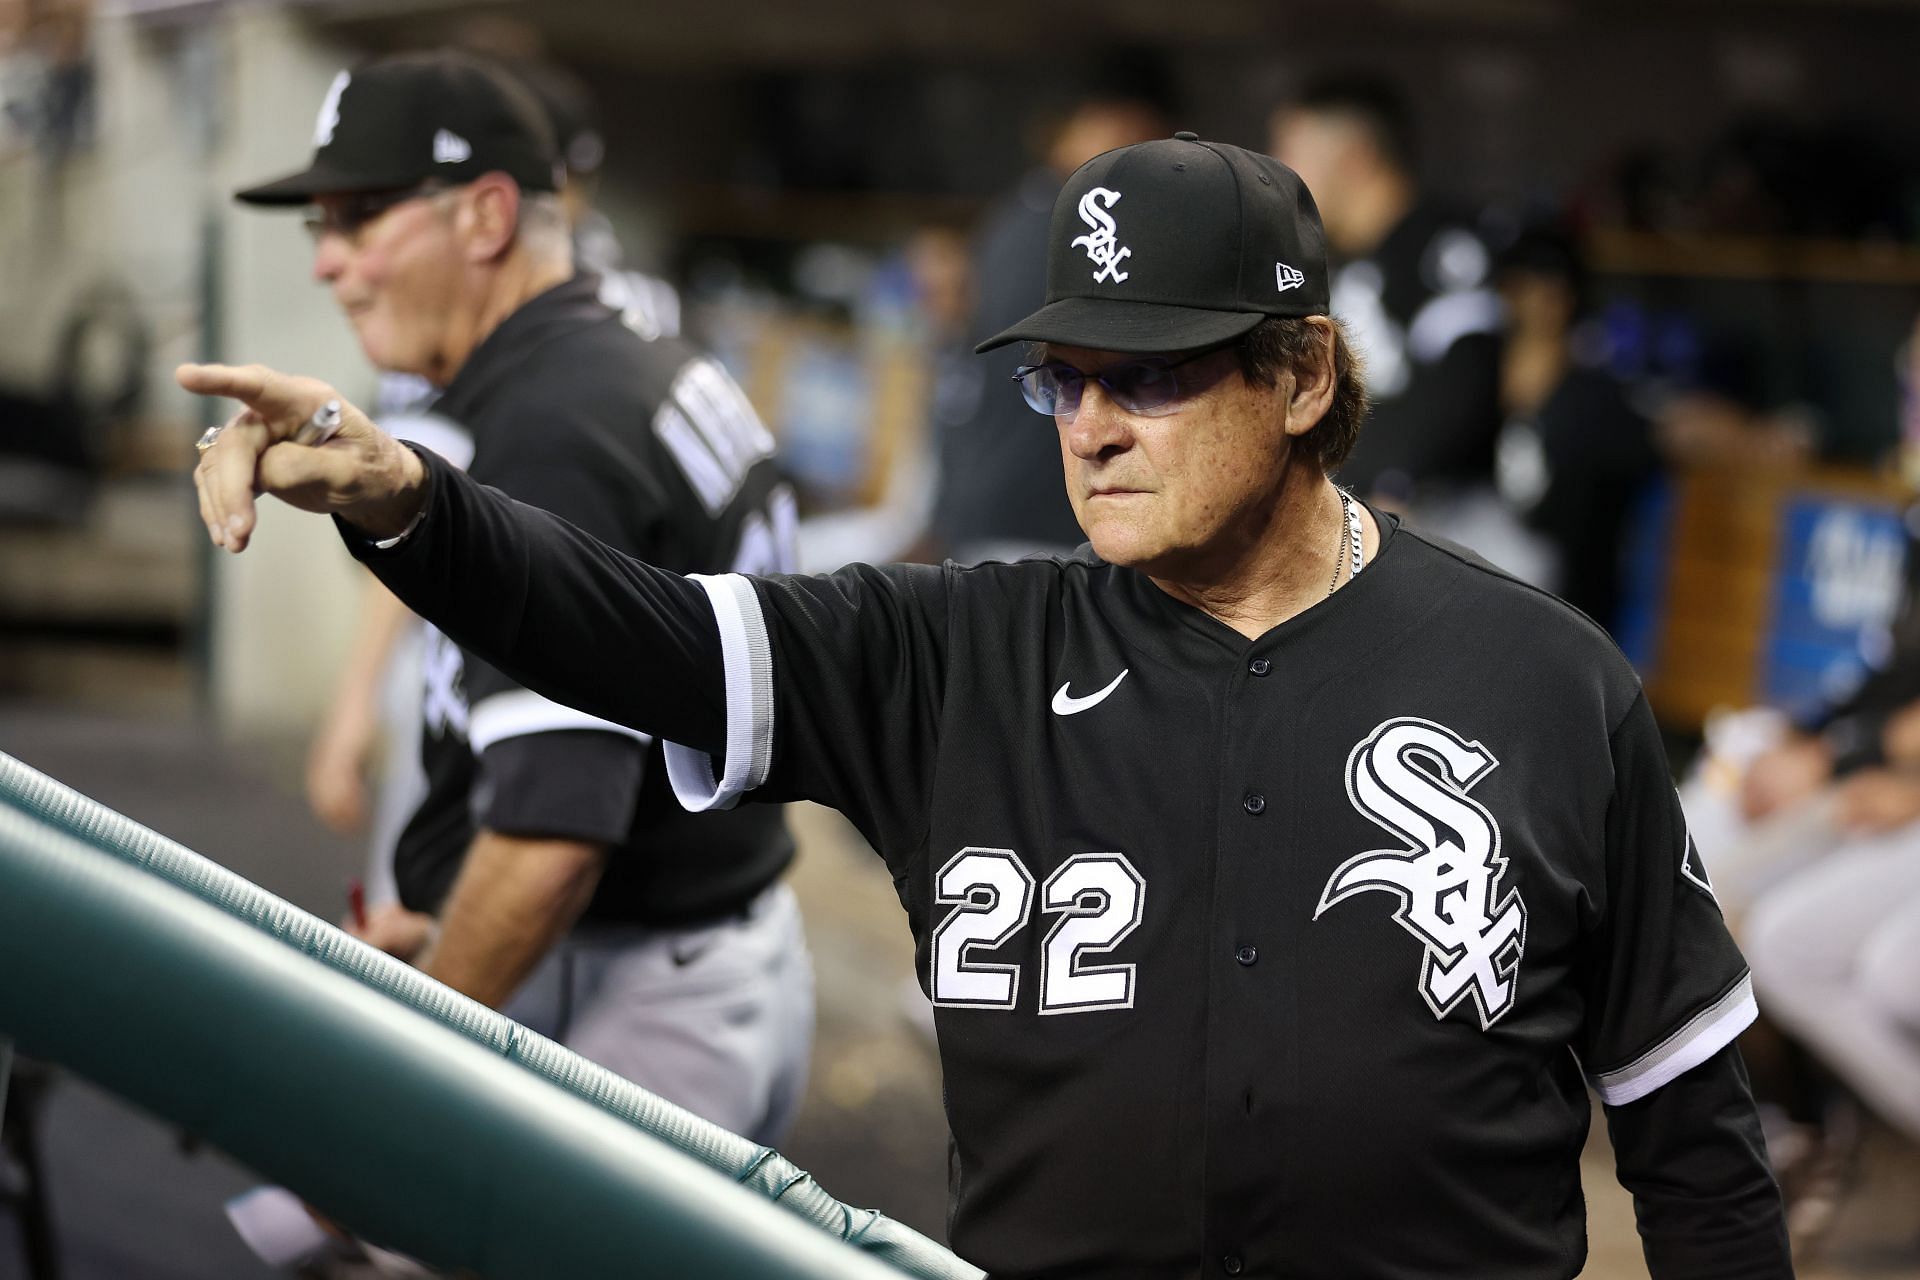 Who should manage White Sox in 2023 if La Russa doesn't return